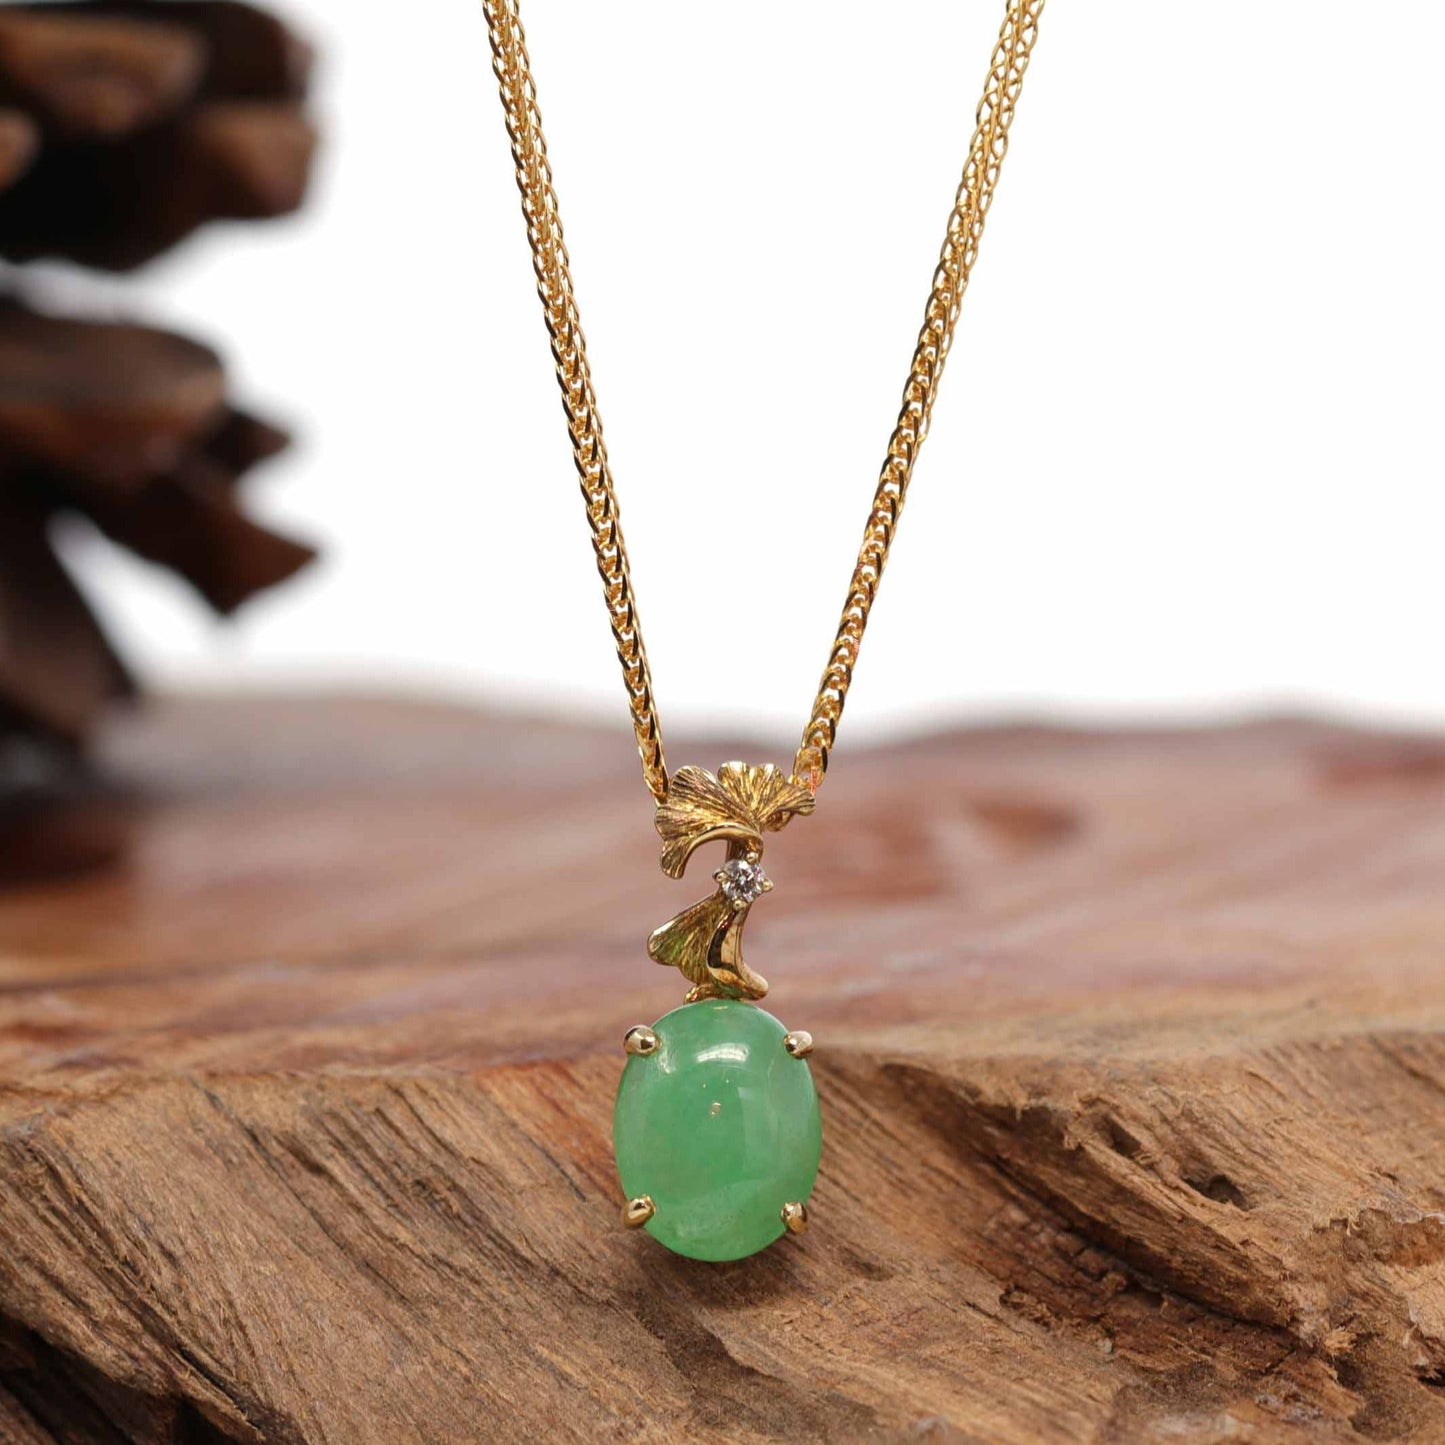 18K Yellow Gold "Apricot Flower" Oval Apple Green Jadeite Jade Cabochon Necklace with Diamonds